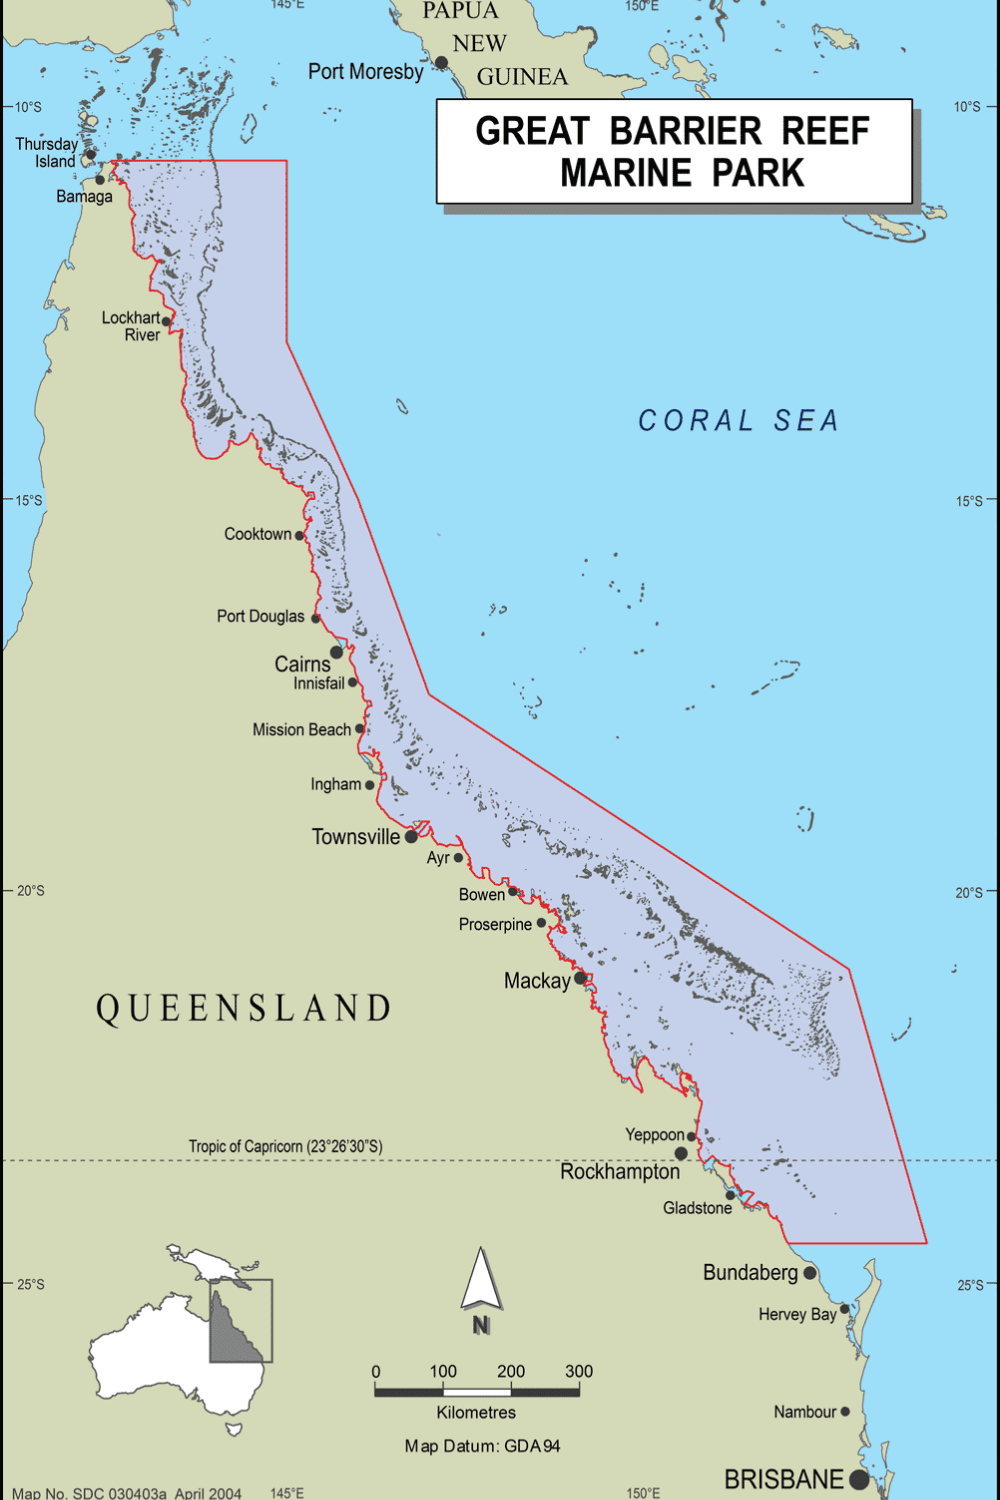 Location of the Great Barrier Reef